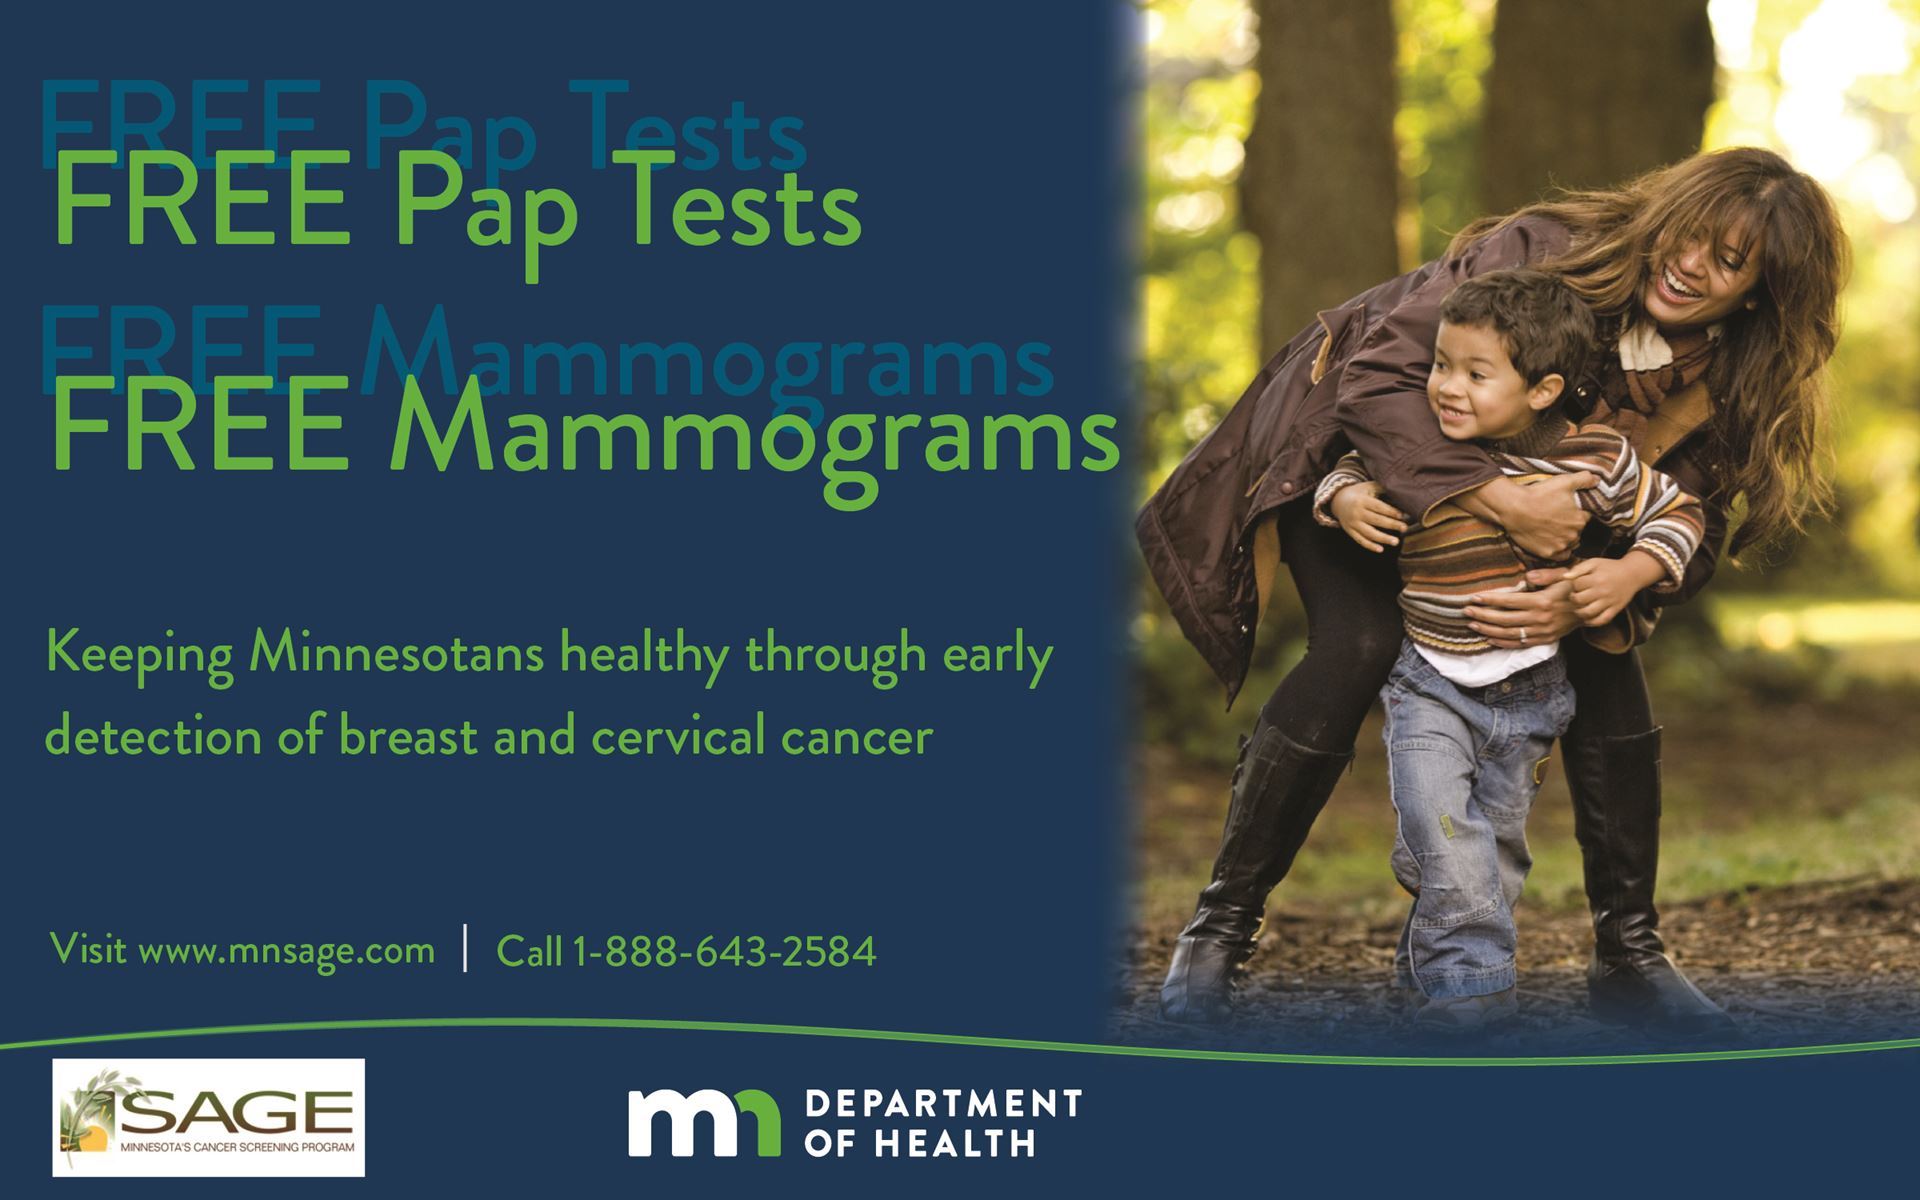 Free Pap tests! Free mammograms! Keeping Minnesotans healthy through early detection of breast and cervical cancer. MN Sage Cancer Programs